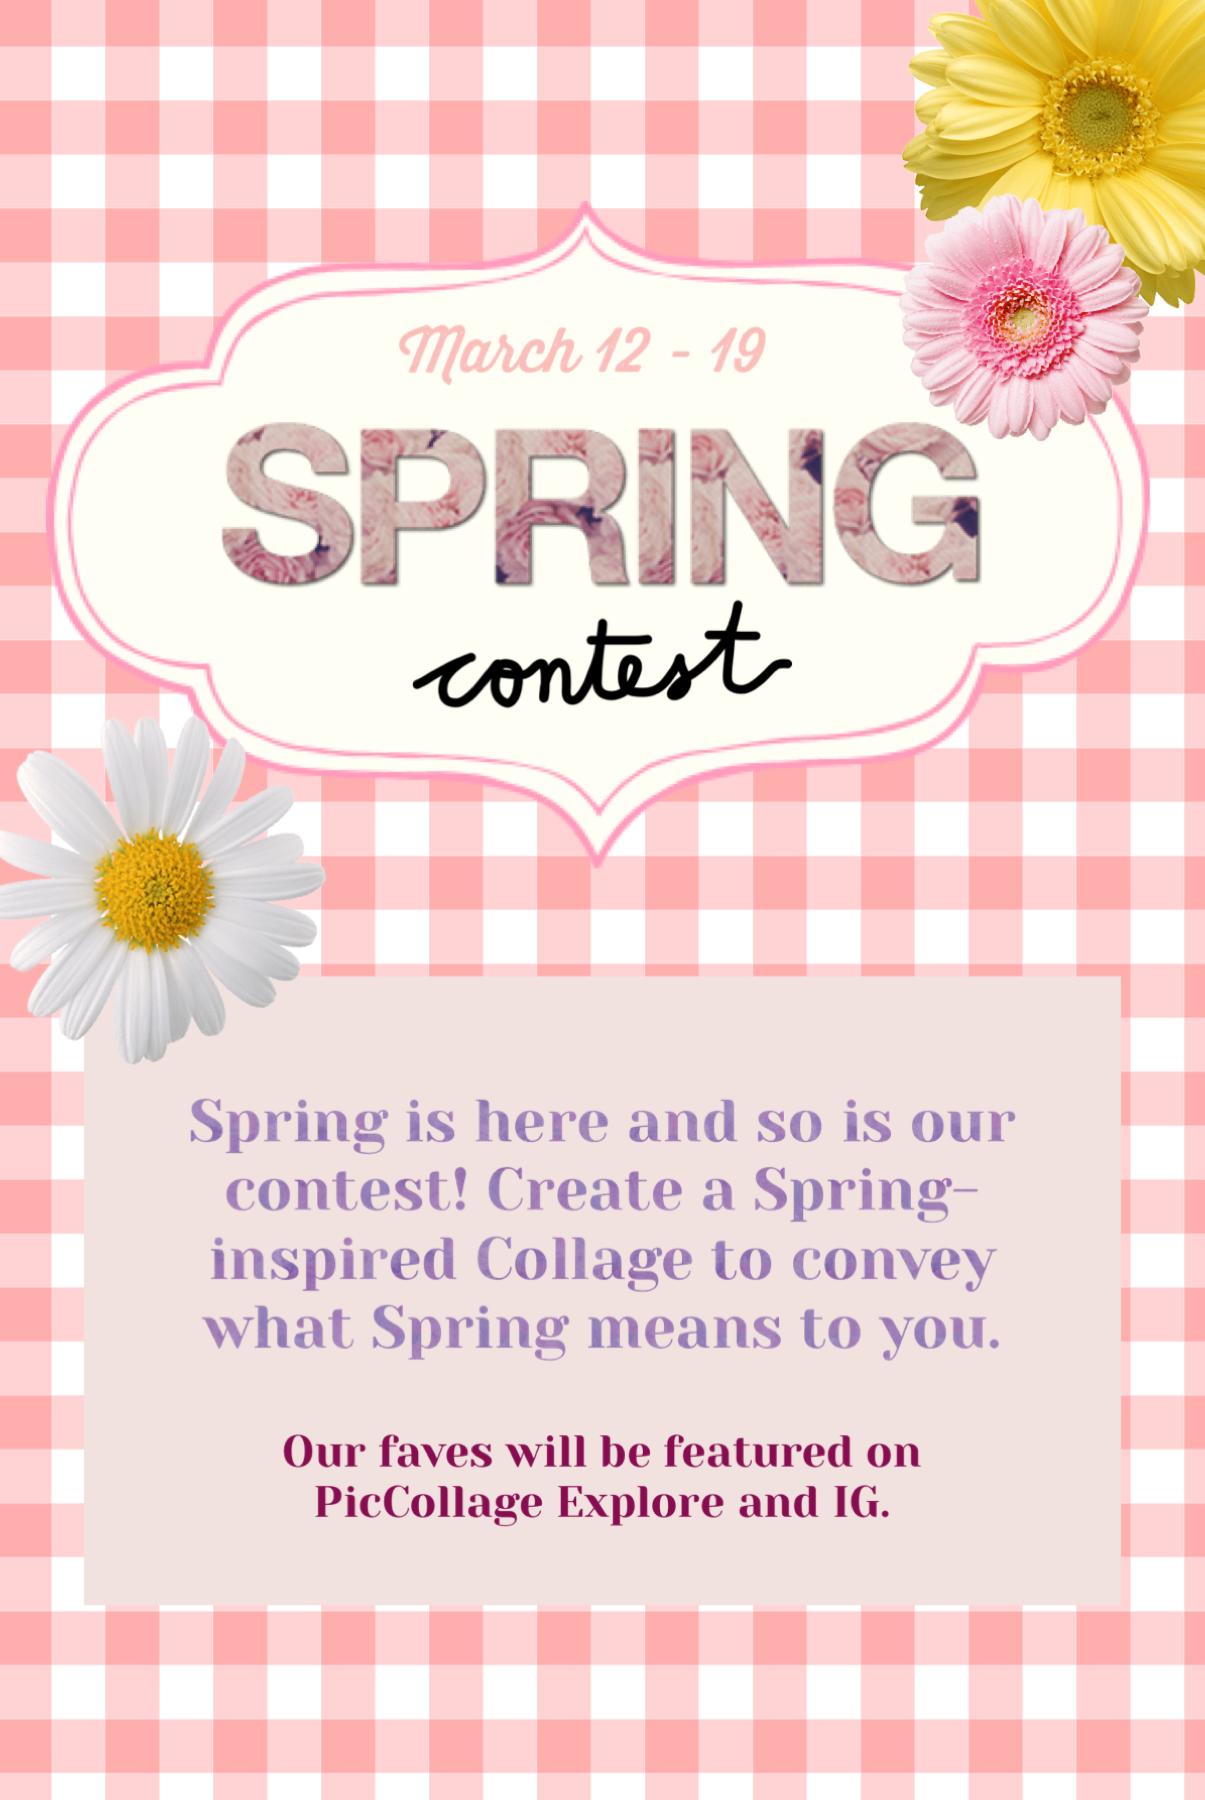 🌸 Spring contest is here! Submit in the remixes by 3/19 Thursday.